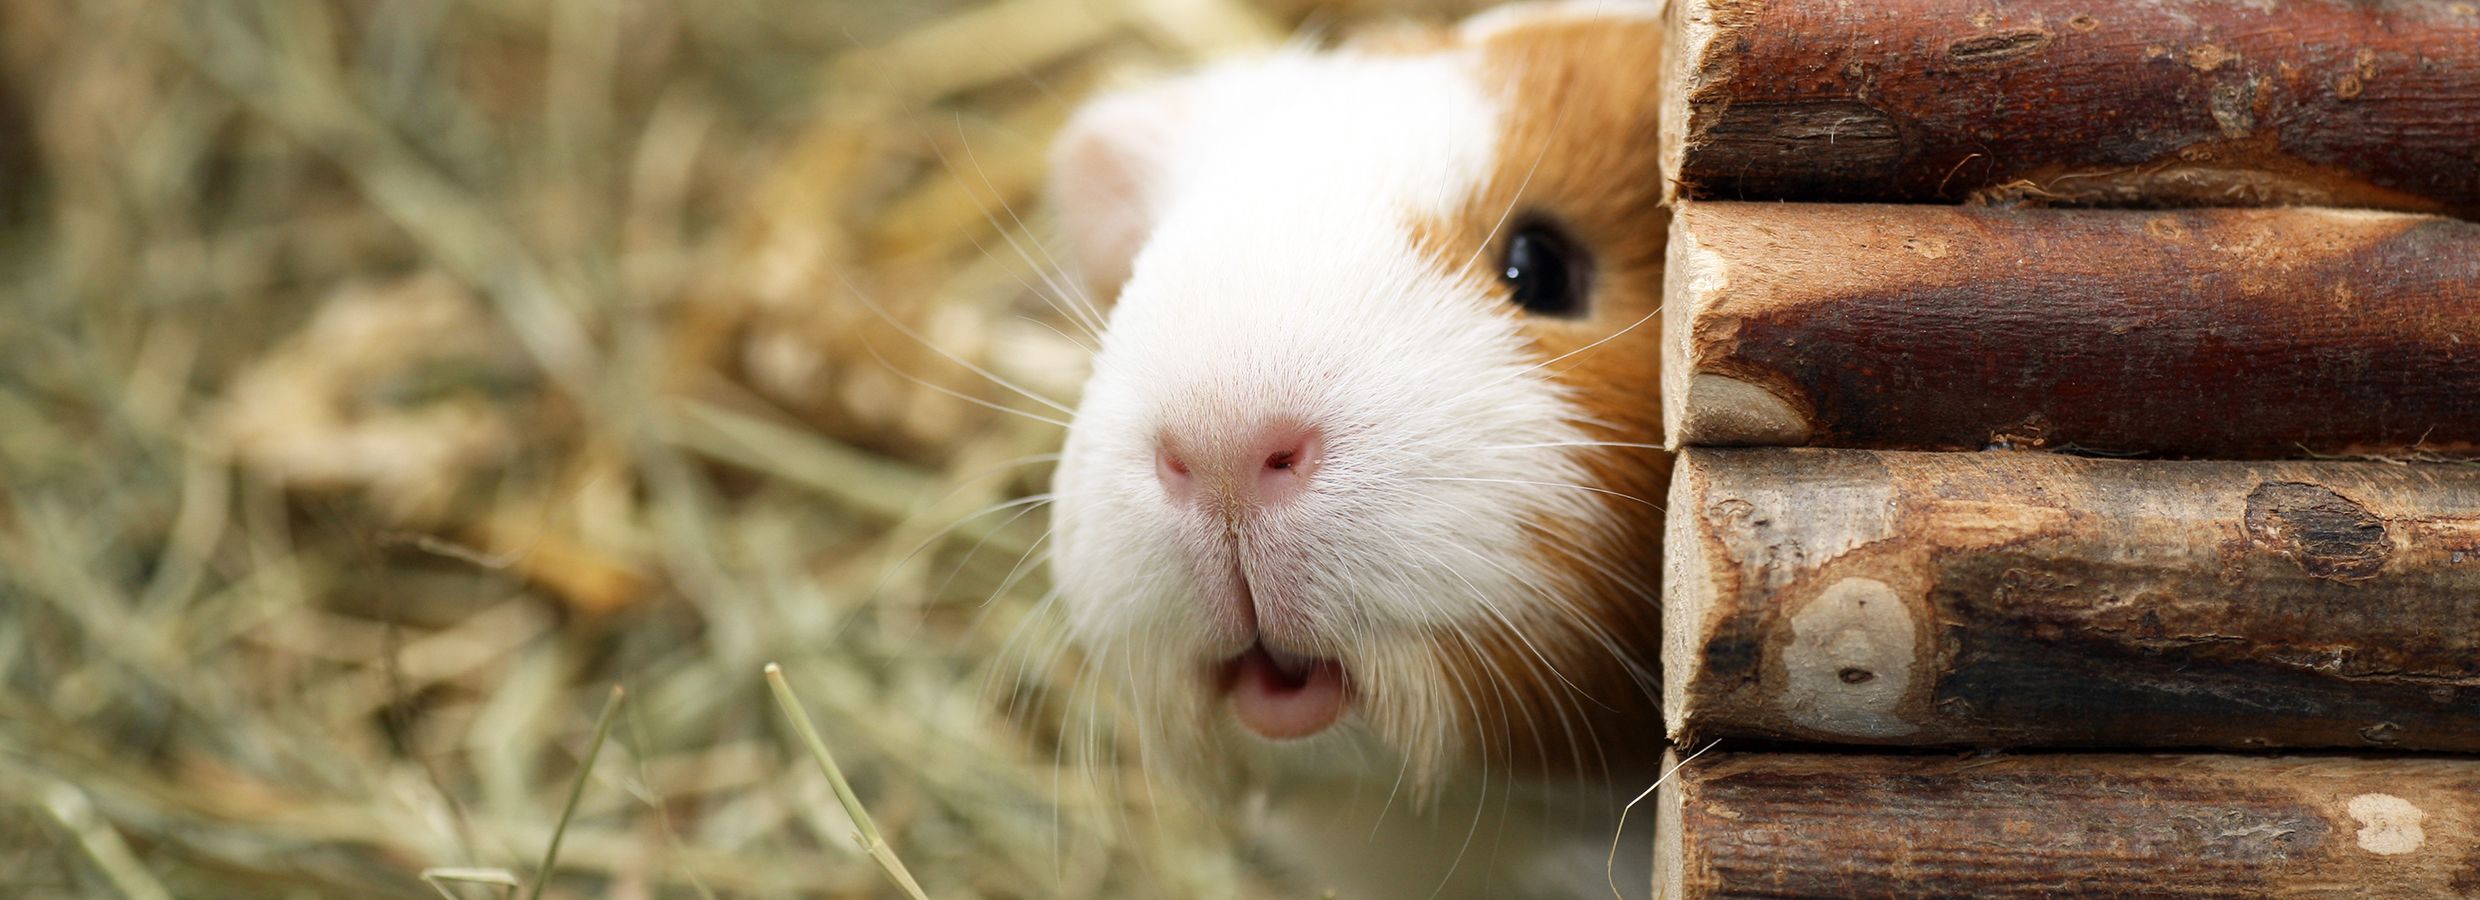 how much do guinea pigs cost at petsmart